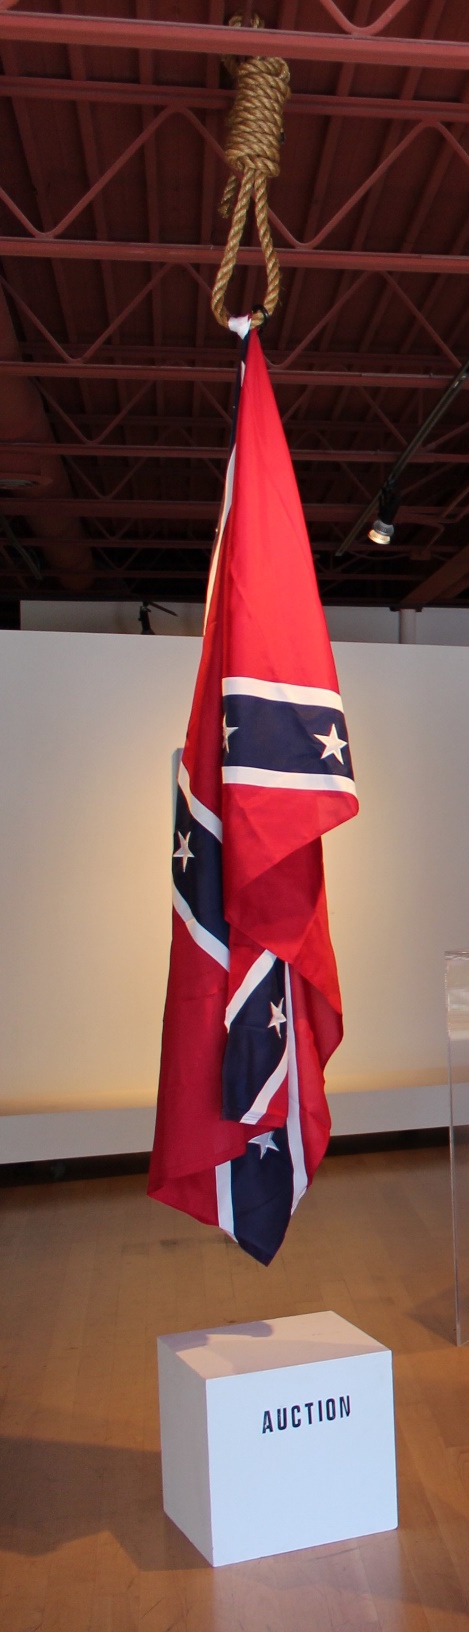 The Proper Way To Hang A Confederate Flag © John Sims, courtesy the artist and Moberg Gallery..